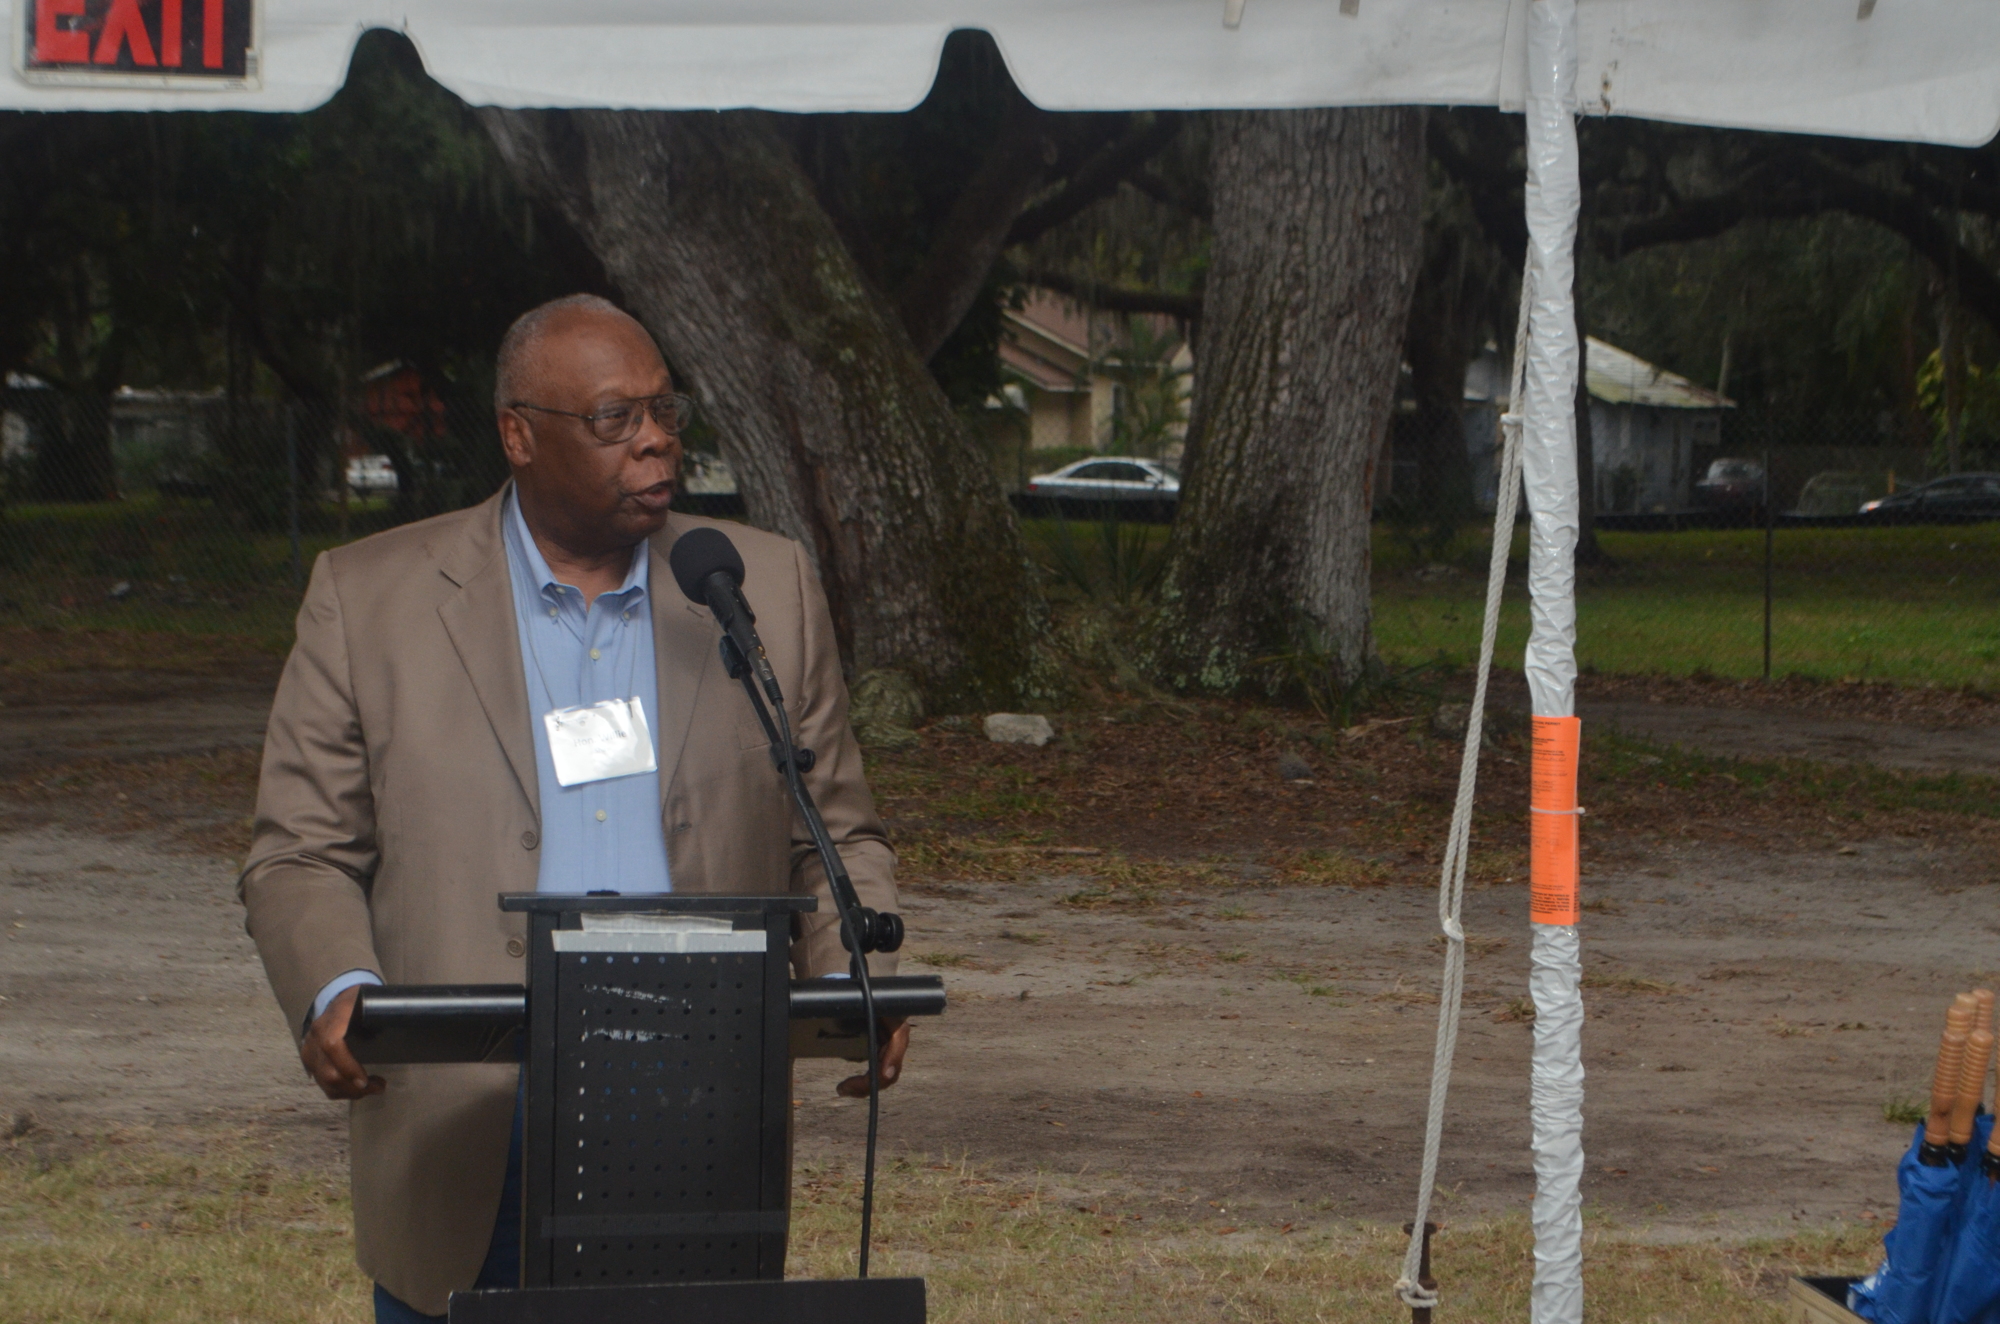 Sarasota mayor Willie Shaw looks forward to the Soundstage having a positive economic impact on the nearby Newtown neighborhood.